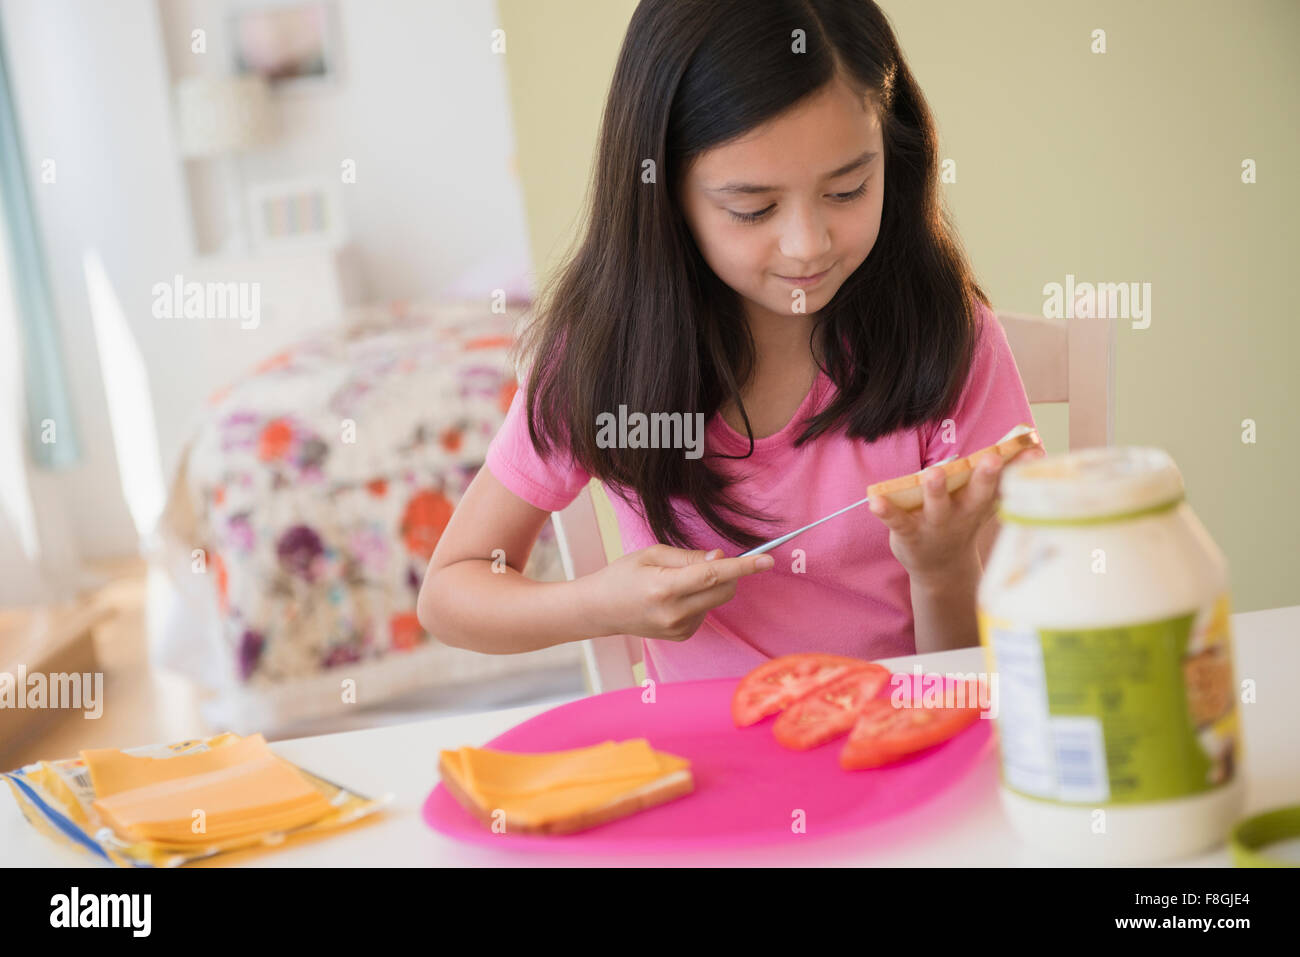 Girl making lunch sandwiches Stock Photo